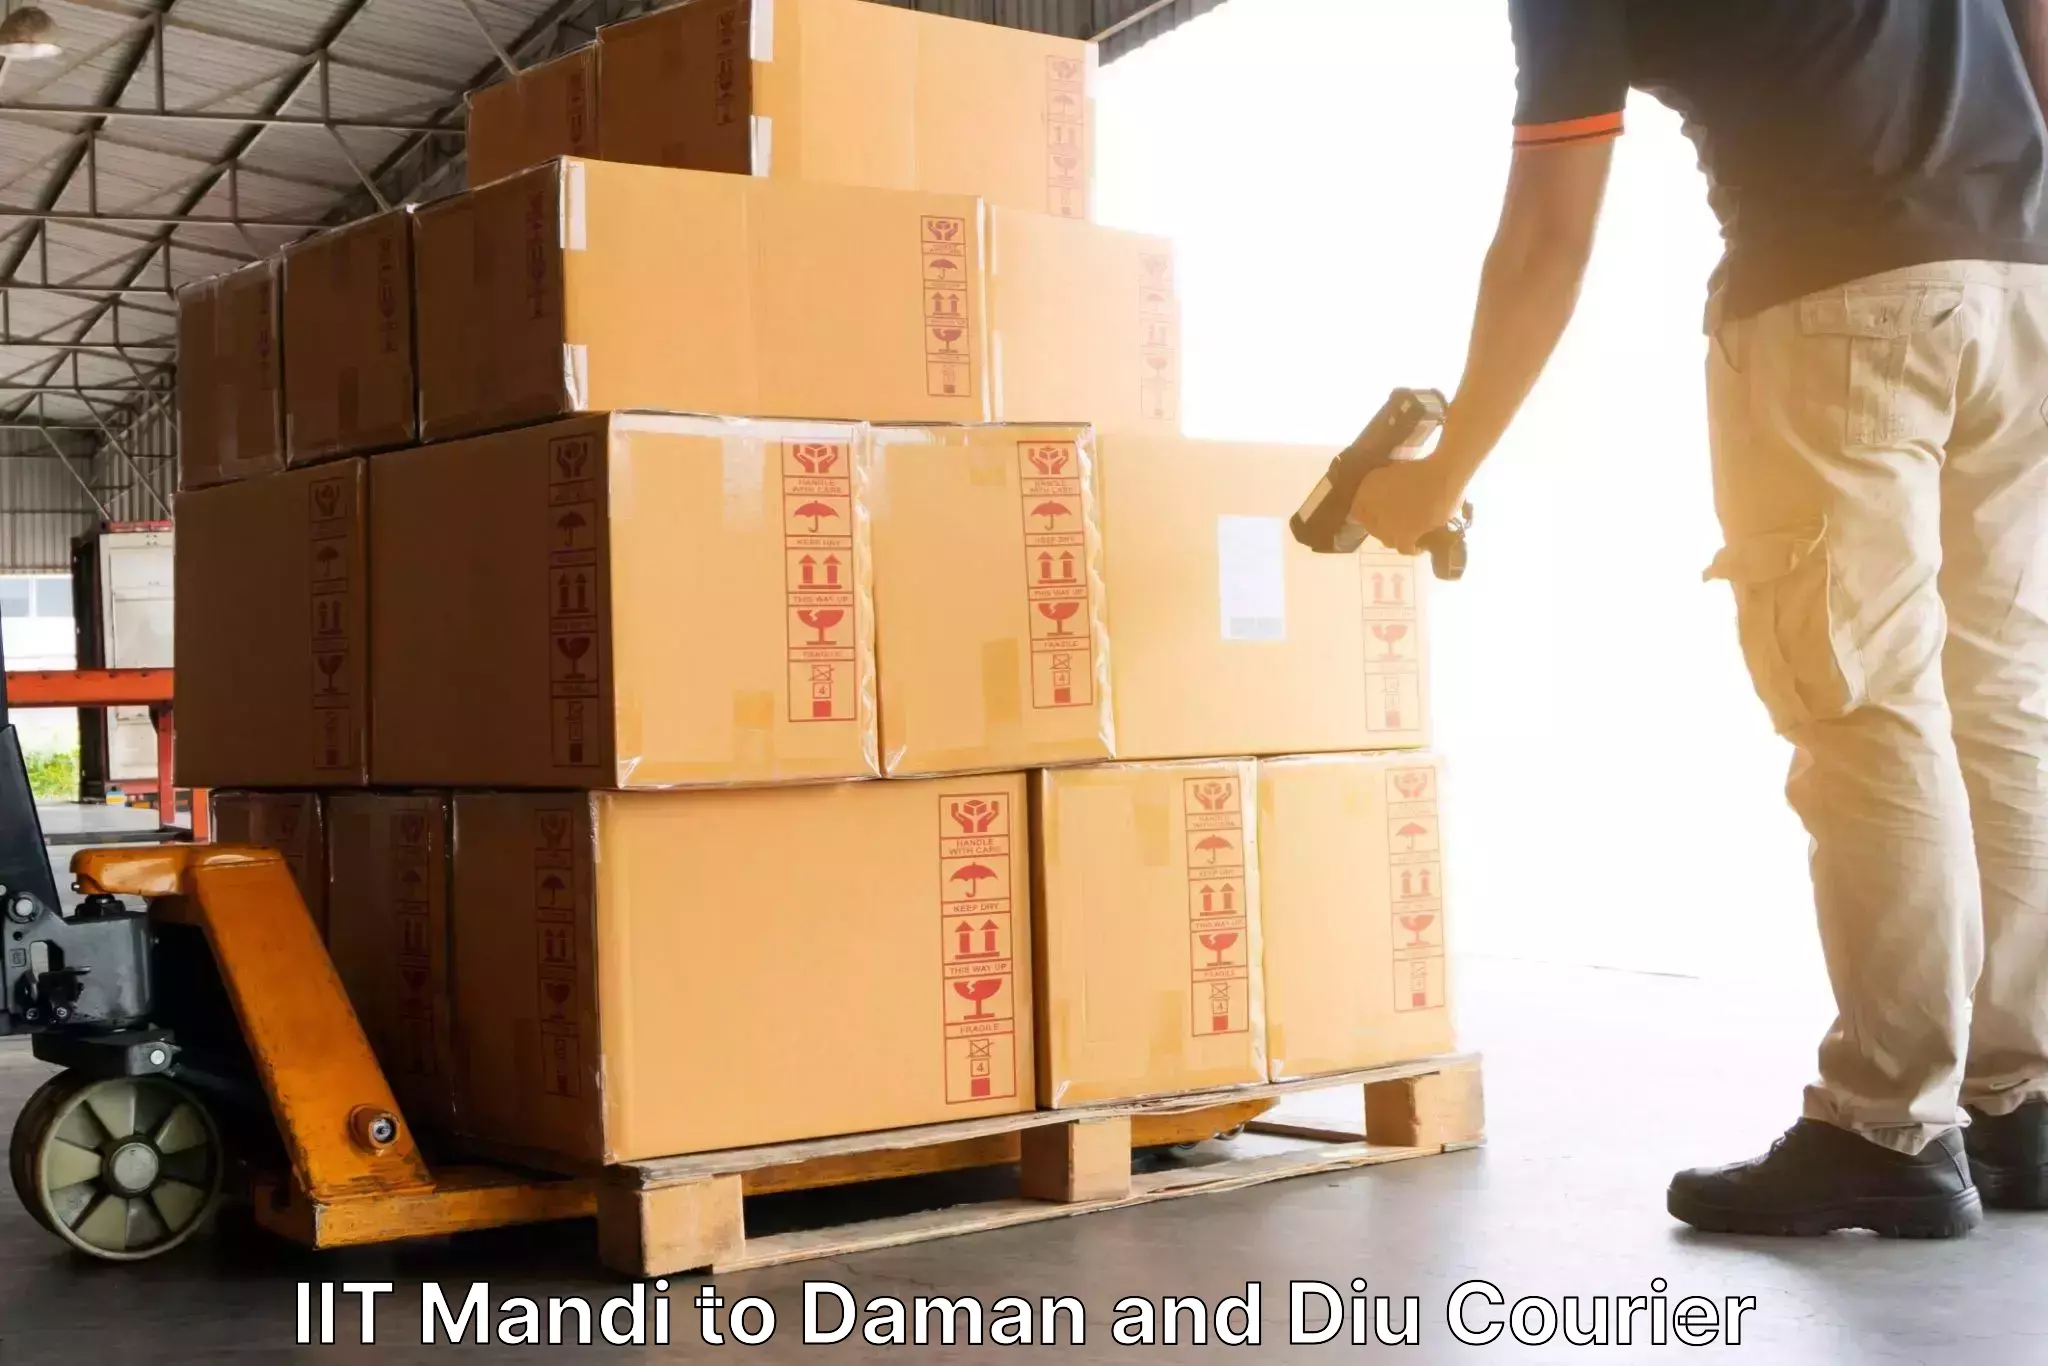 Same-day delivery options IIT Mandi to Diu